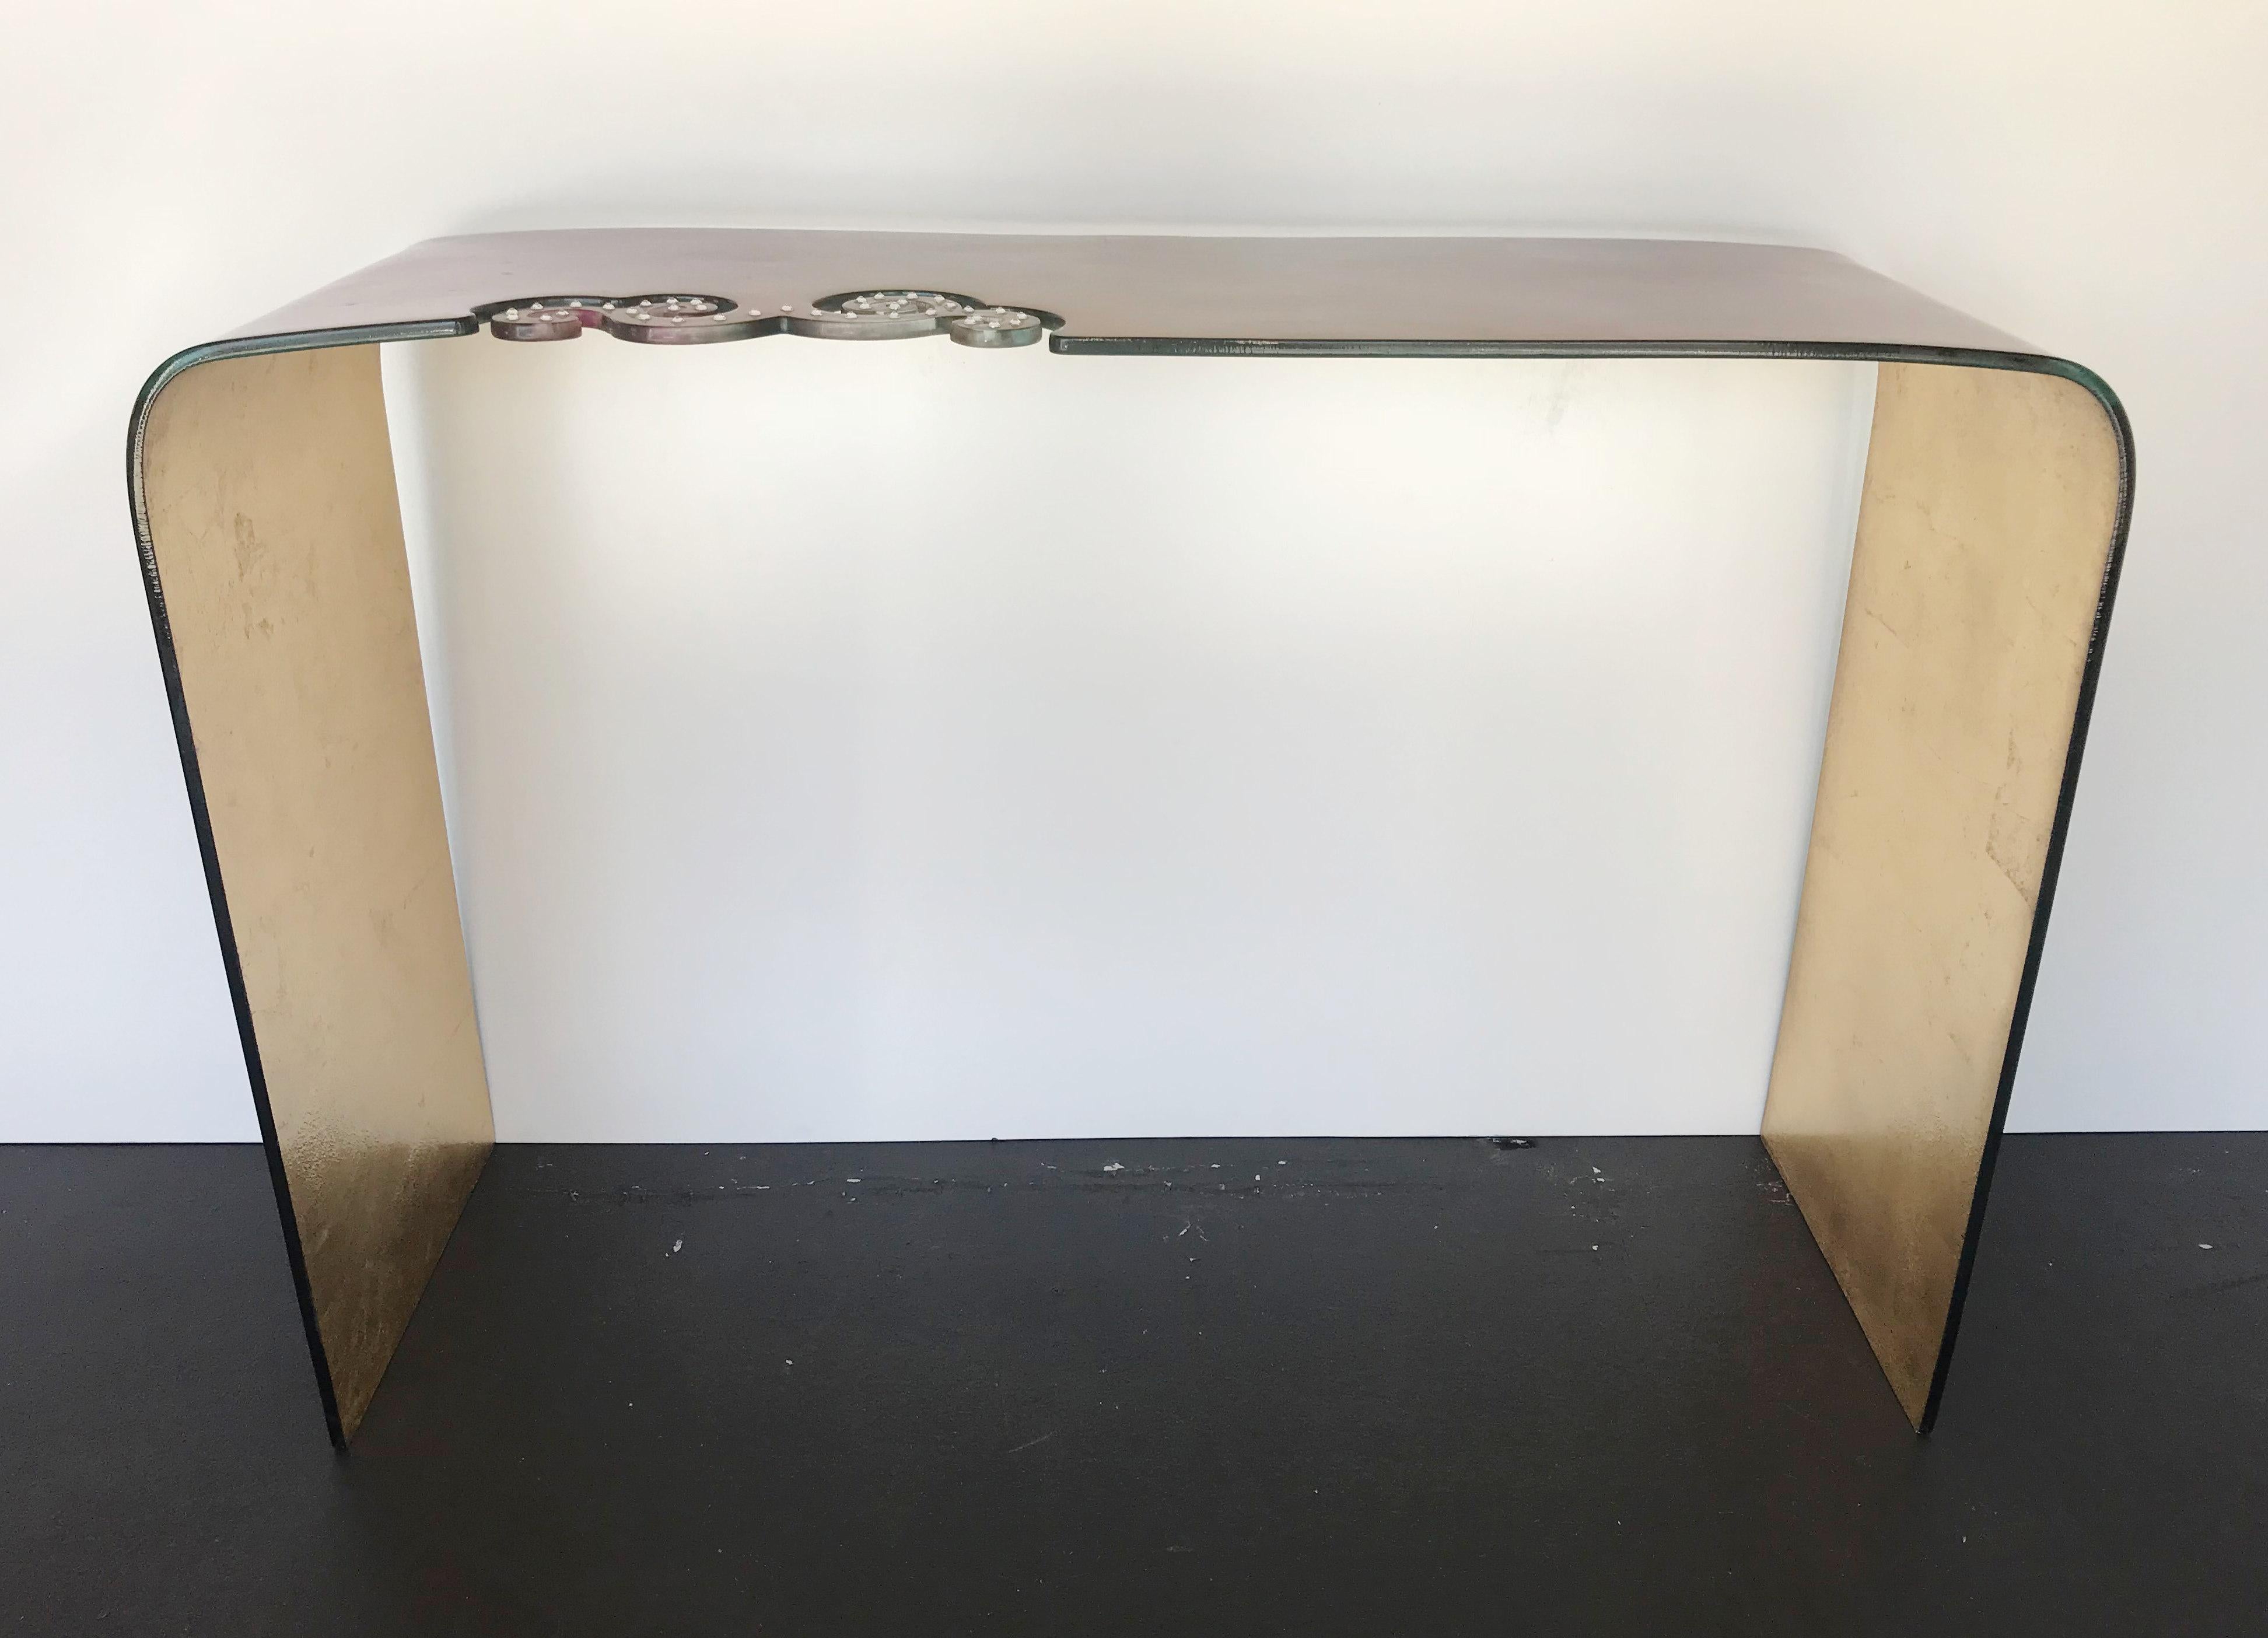 Italian glass console table decorated with Swarovski Strass crystals / Made in Italy in the 1980's
Height: 28.5 inches / Width: 41.5 inches / Depth: 14 inches
1 in stock in Palm Springs ON FINAL CLEARANCE SALE for $899!!!
Order Reference #: FABIOLTD